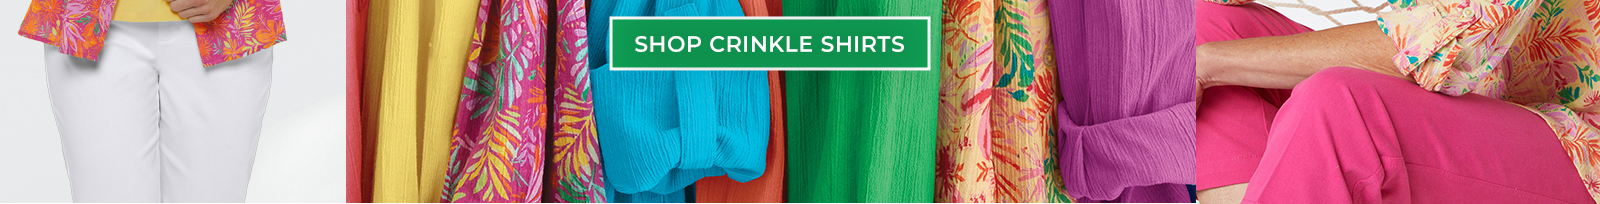 cool, comfort crinkle breeze into our best-selling Crinkle shirts. tropical prints or tasty solids. shop crinkle shirts